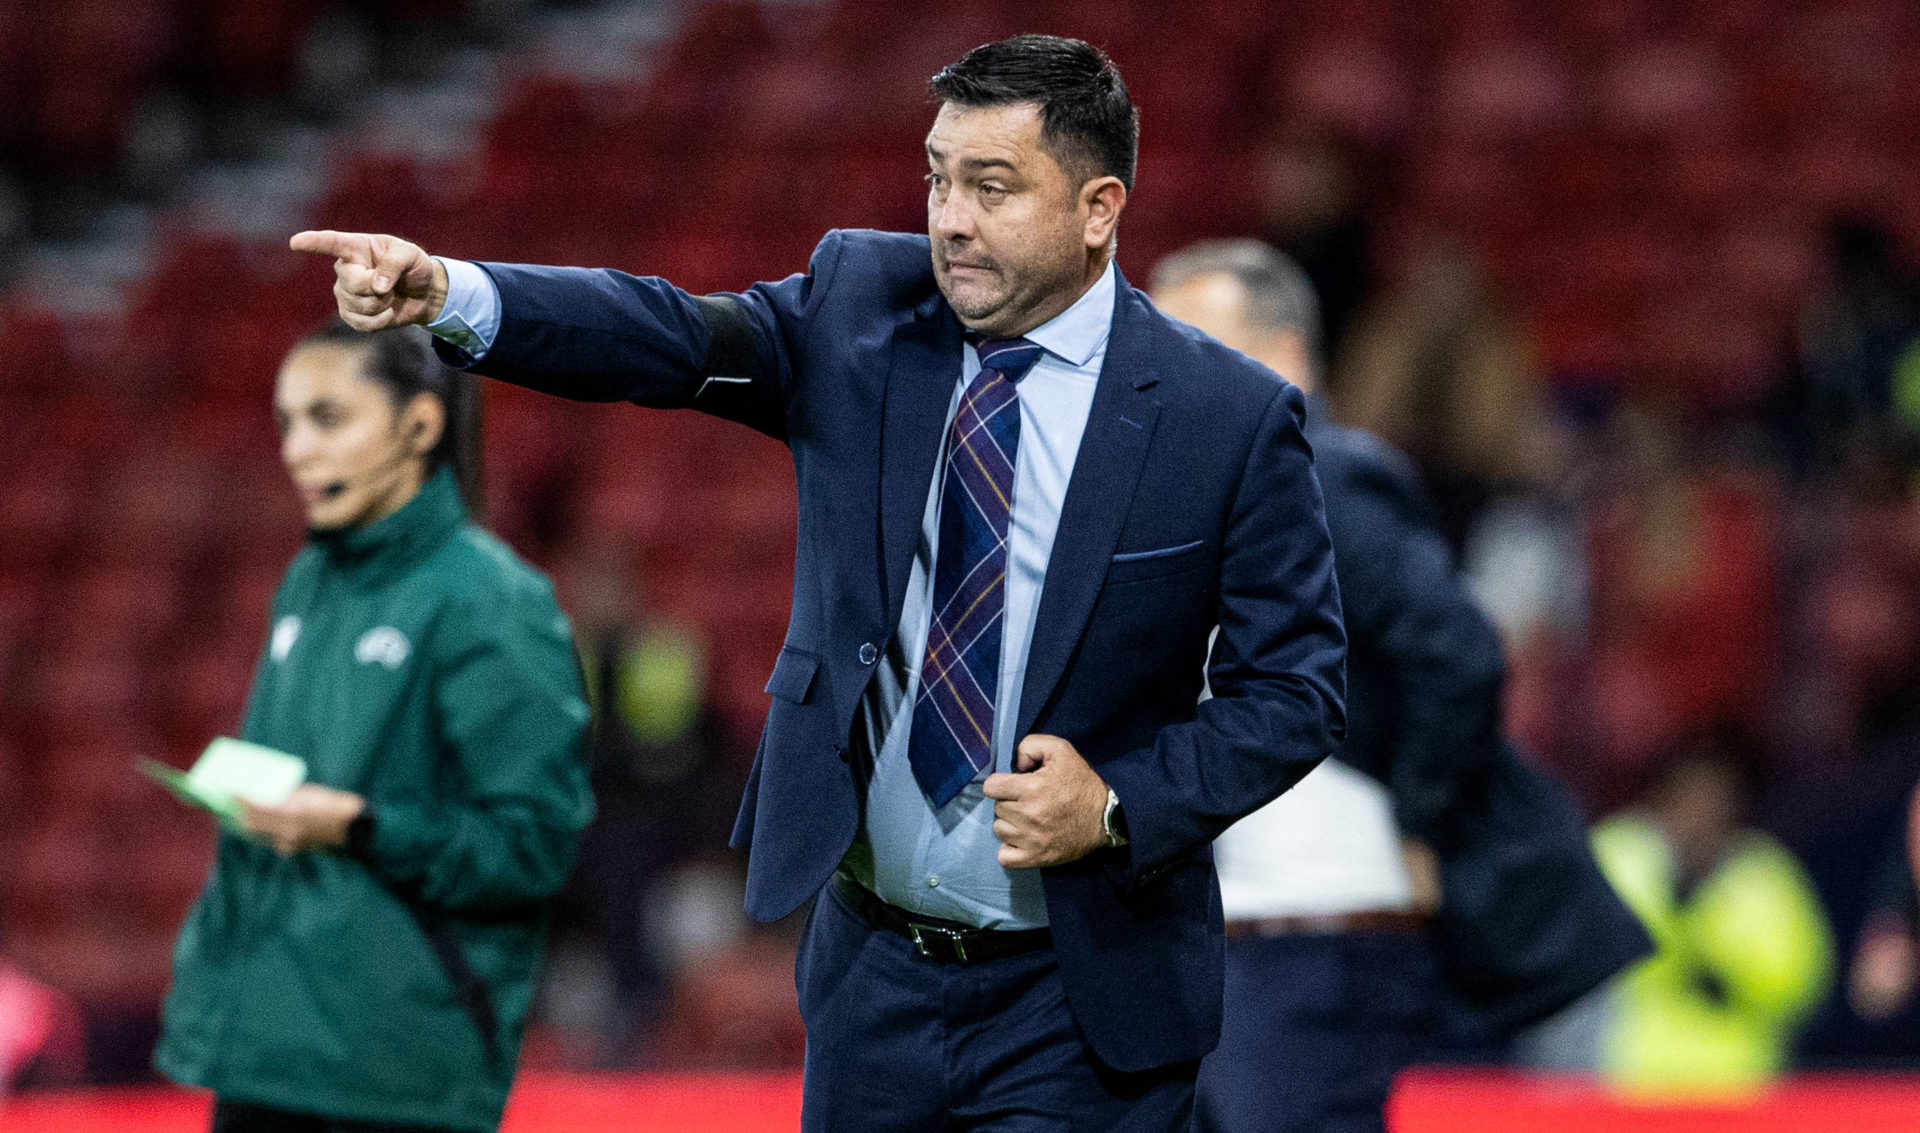 Pedro Martinez Losa aiming for winning finale to sobering Nations League campaign